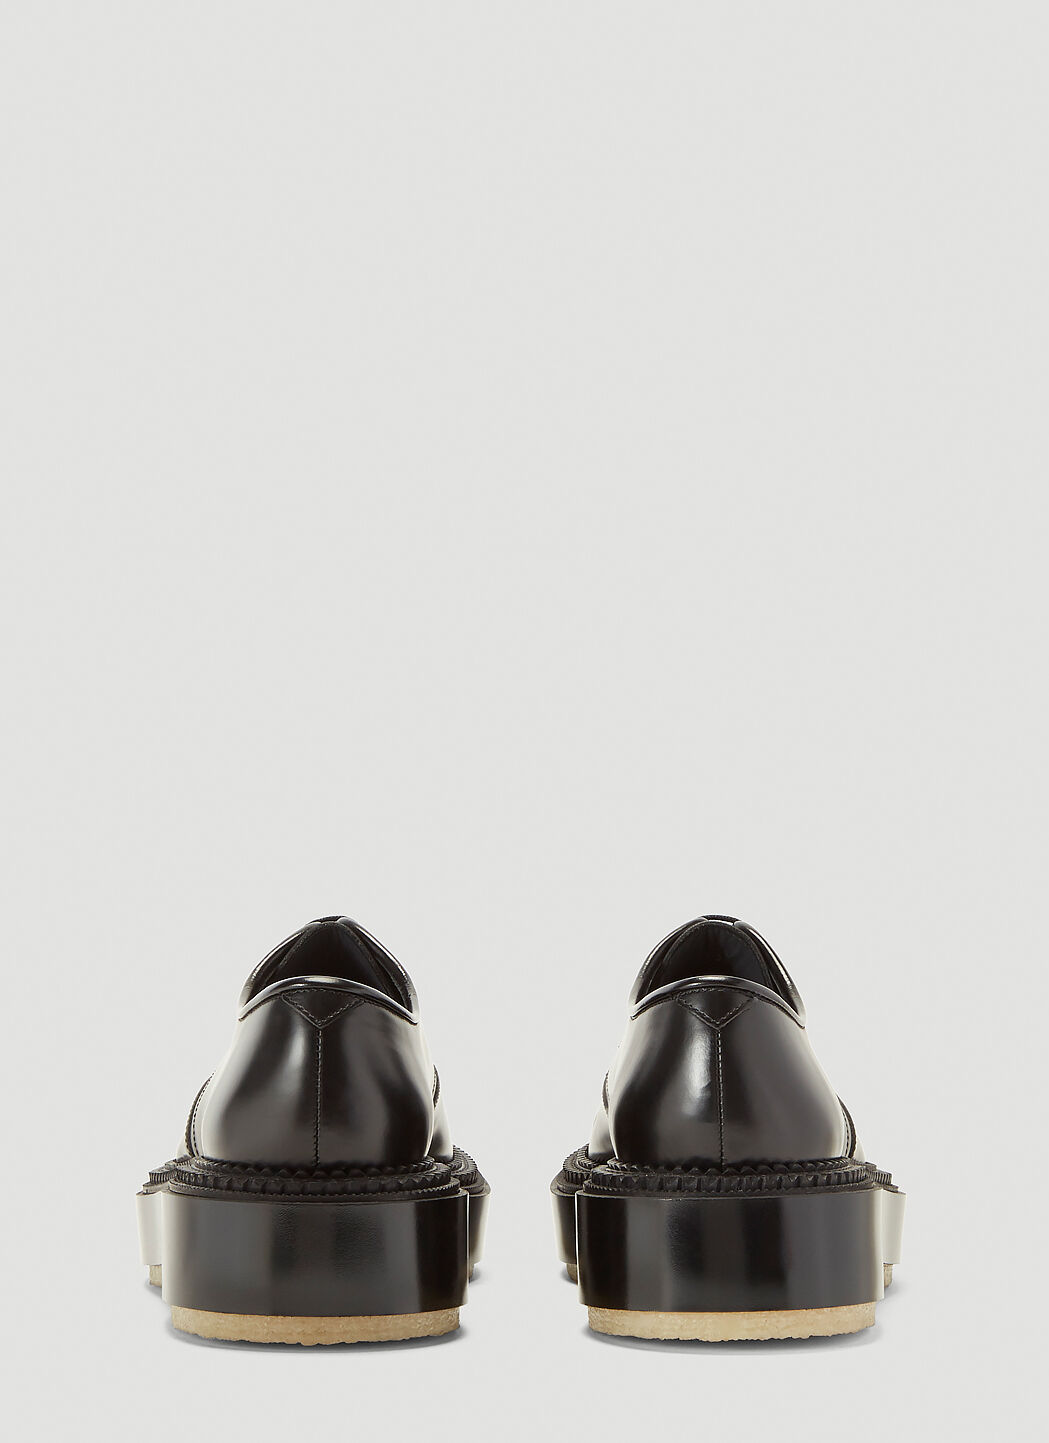 Adieu X Undercover Type 54C Metal Derby Shoes in Black | LN-CC®